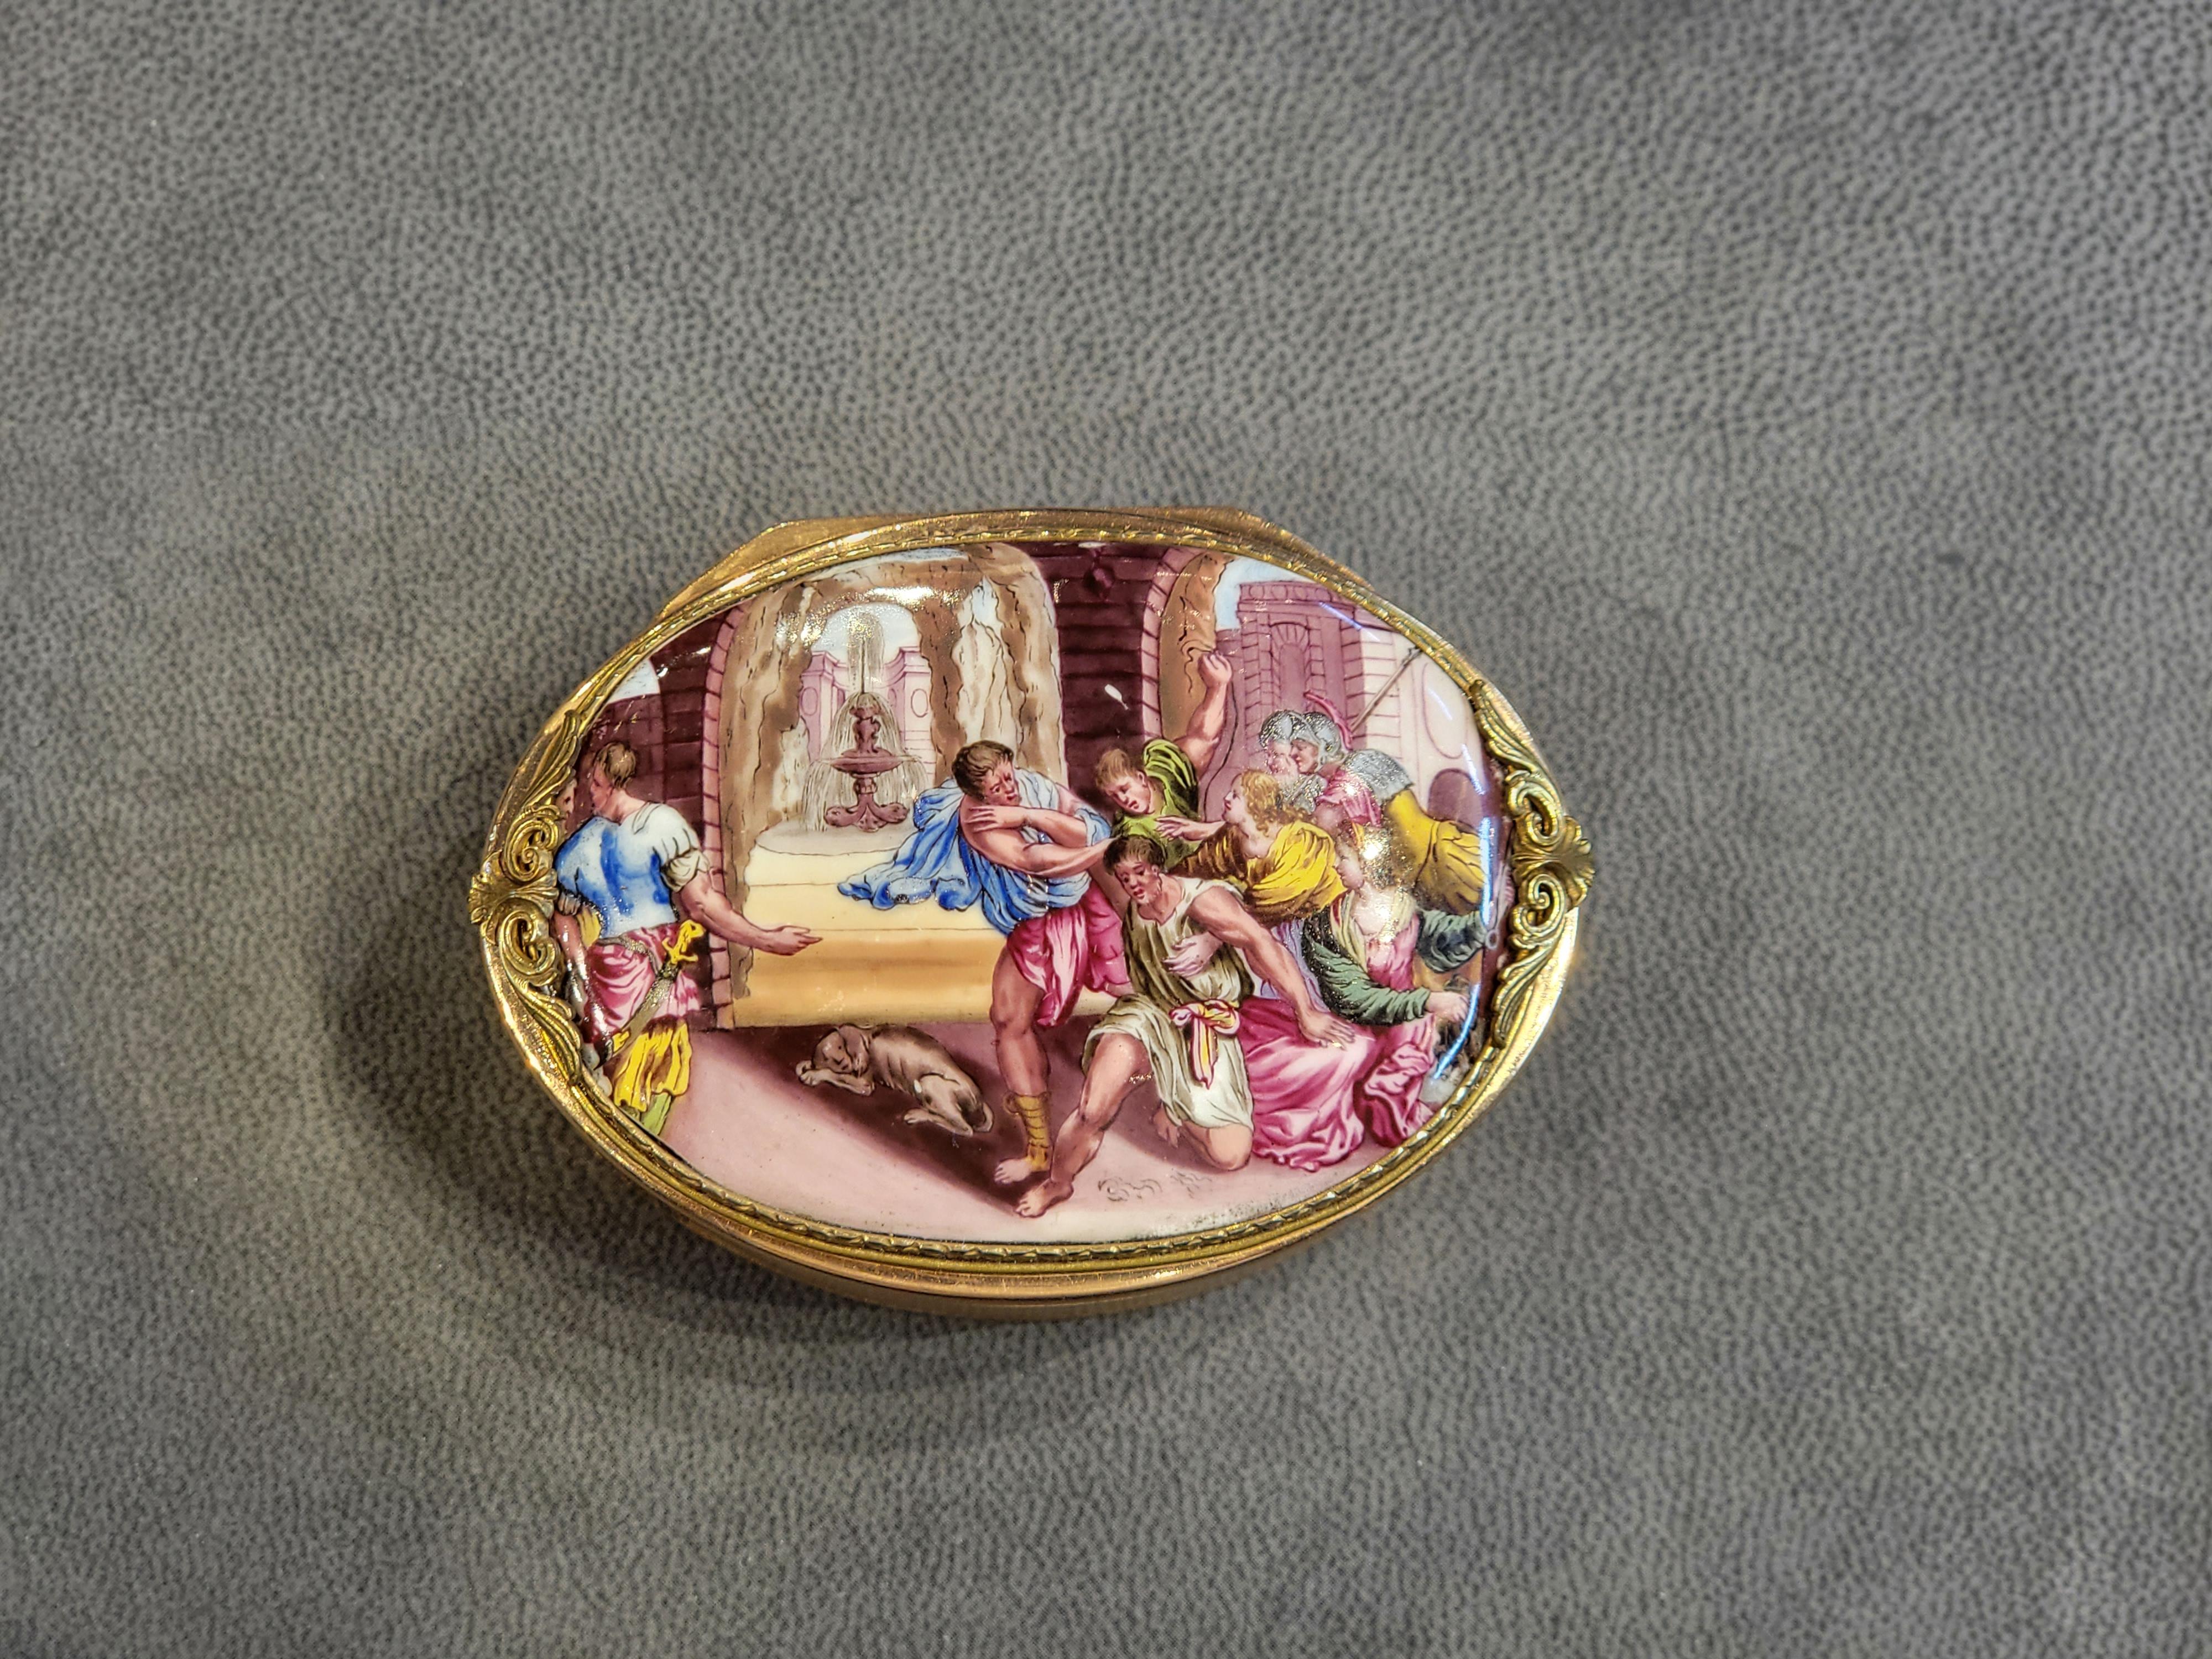 German Gold & Porcelain Snuff Box In Excellent Condition For Sale In New York, NY